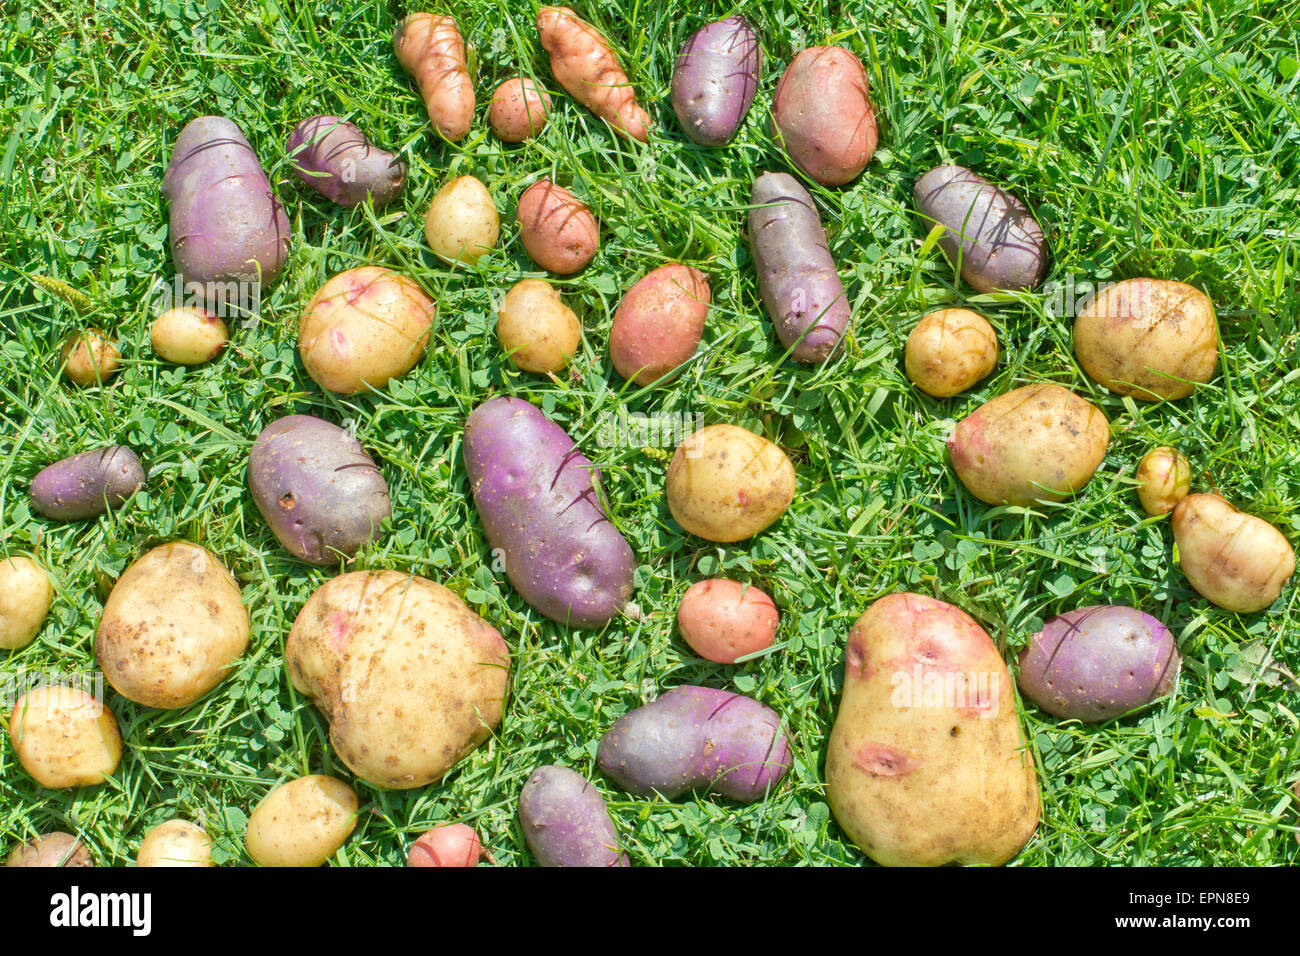 POTATOES SPREAD OUT ON GRASS, VARIETIES BLUE DANUBE, DESIREE AND PINK FIR APPLE Stock Photo